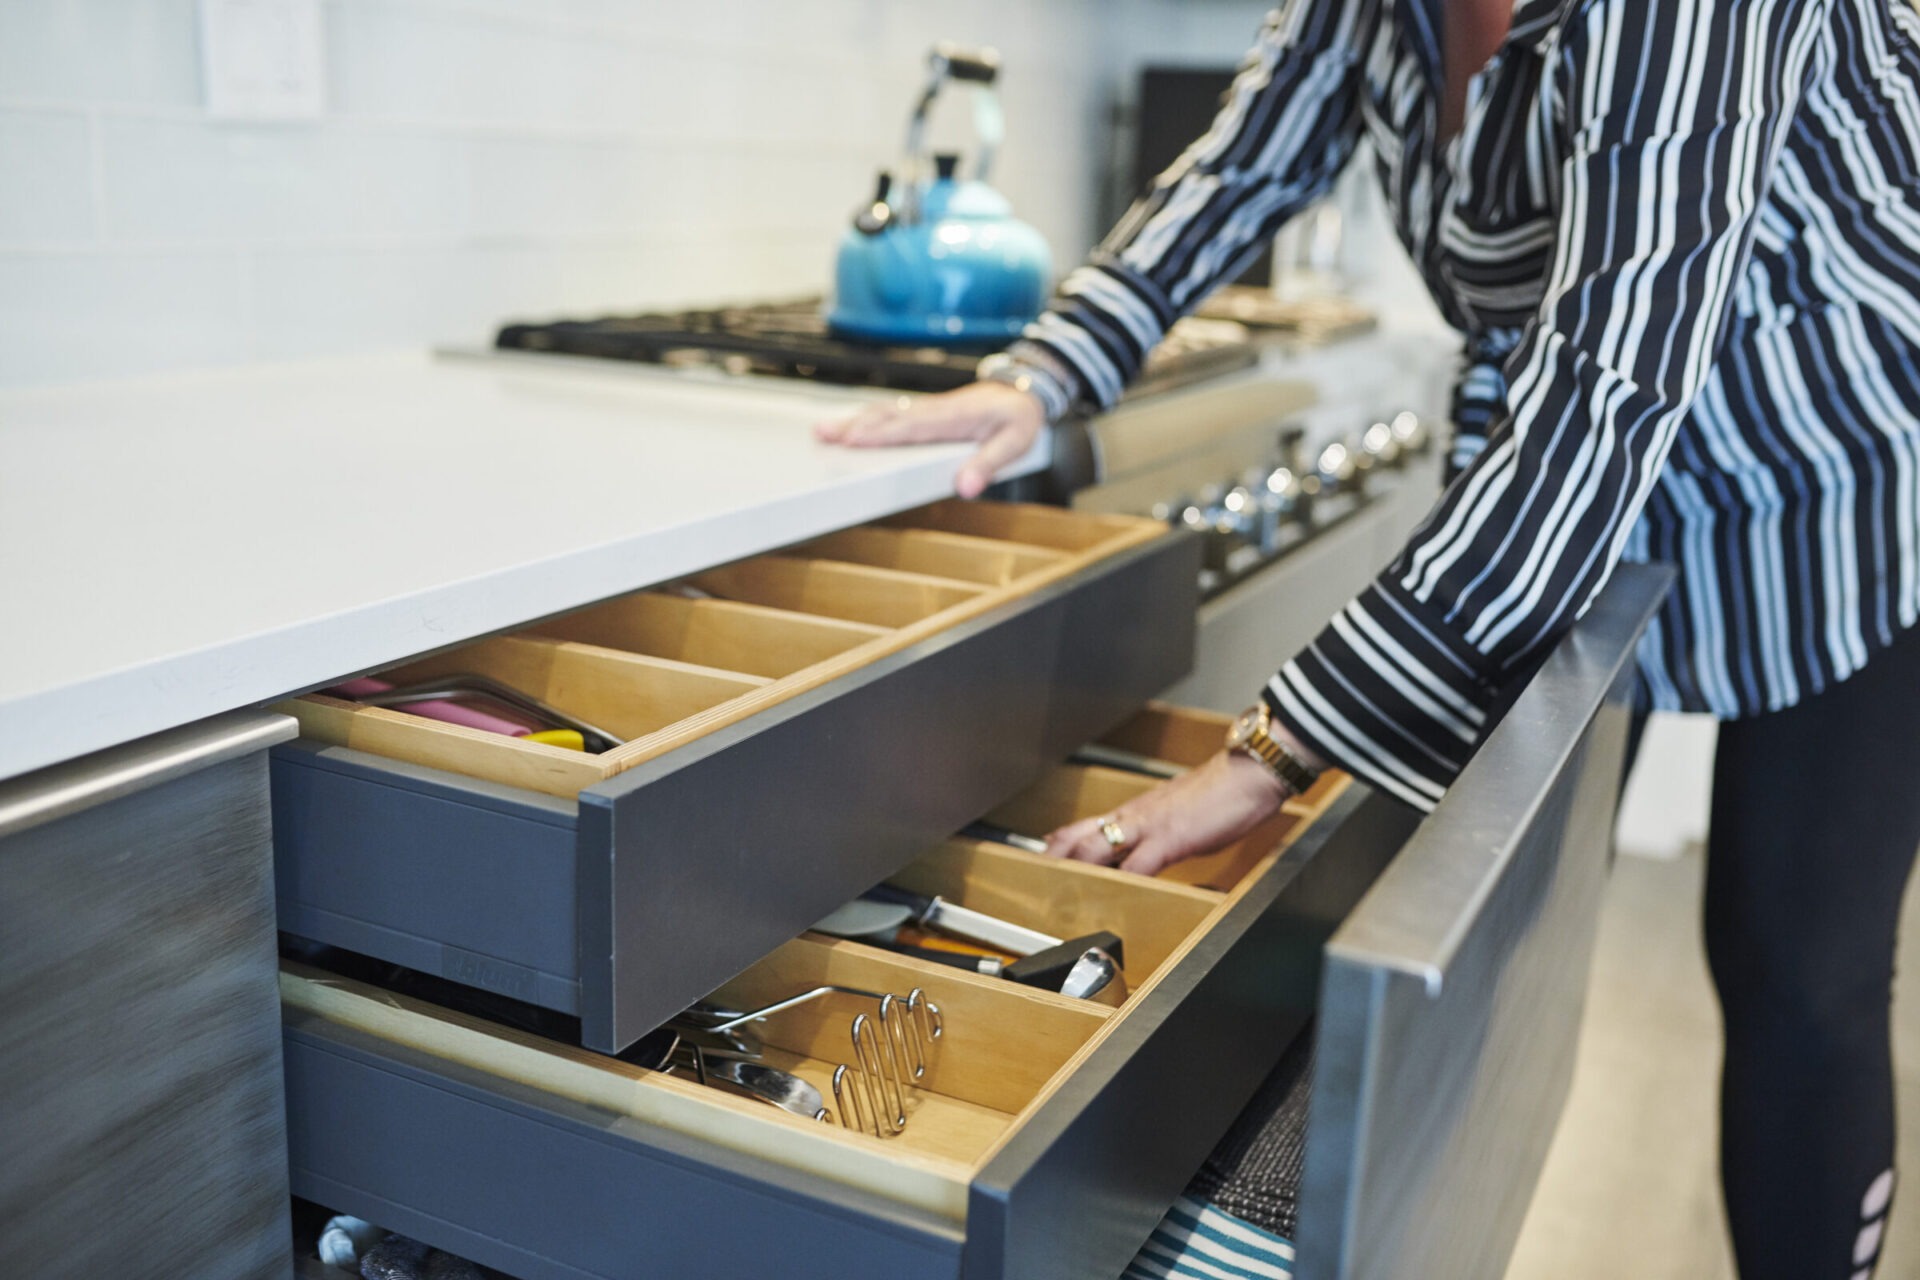 A person is standing at a modern kitchen counter, opening a drawer revealing organized utensils and cutlery. A blue kettle is on the countertop.